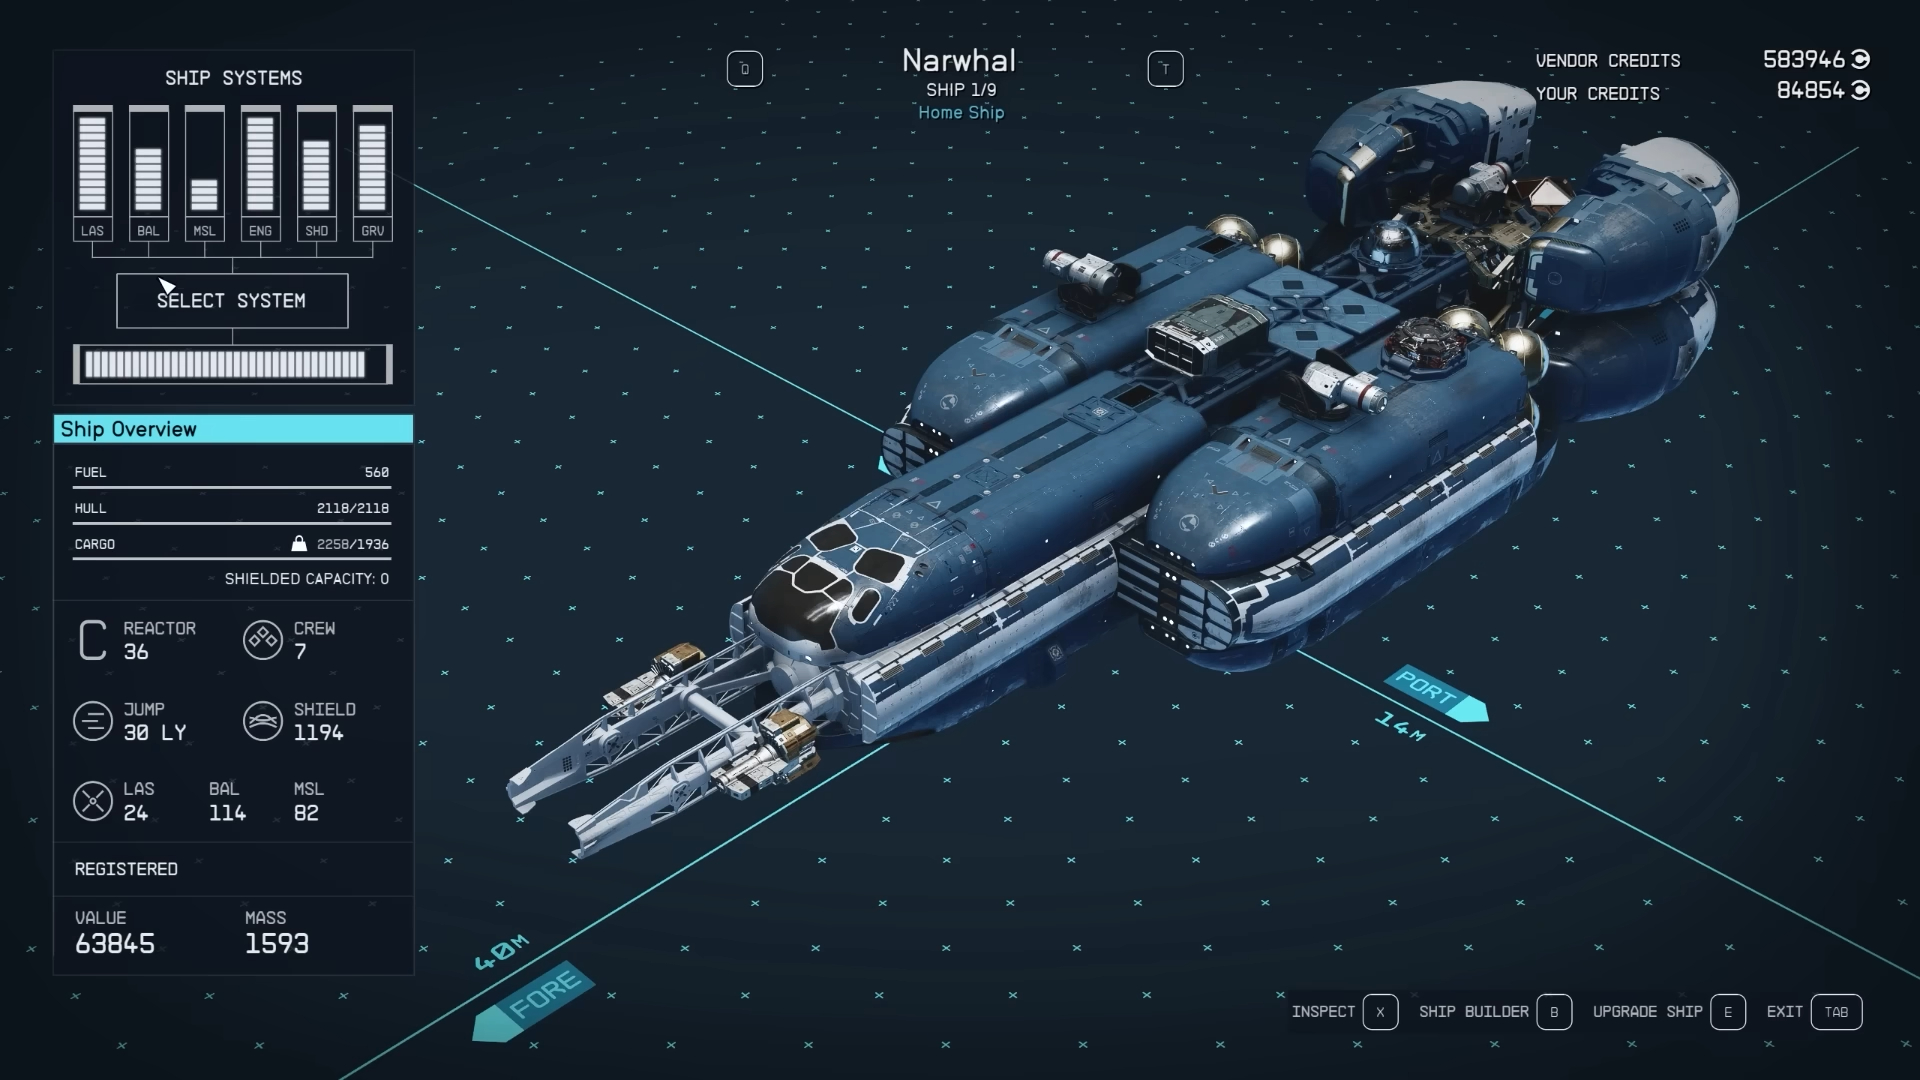 A preview of the Narwhal ship in Starfield.